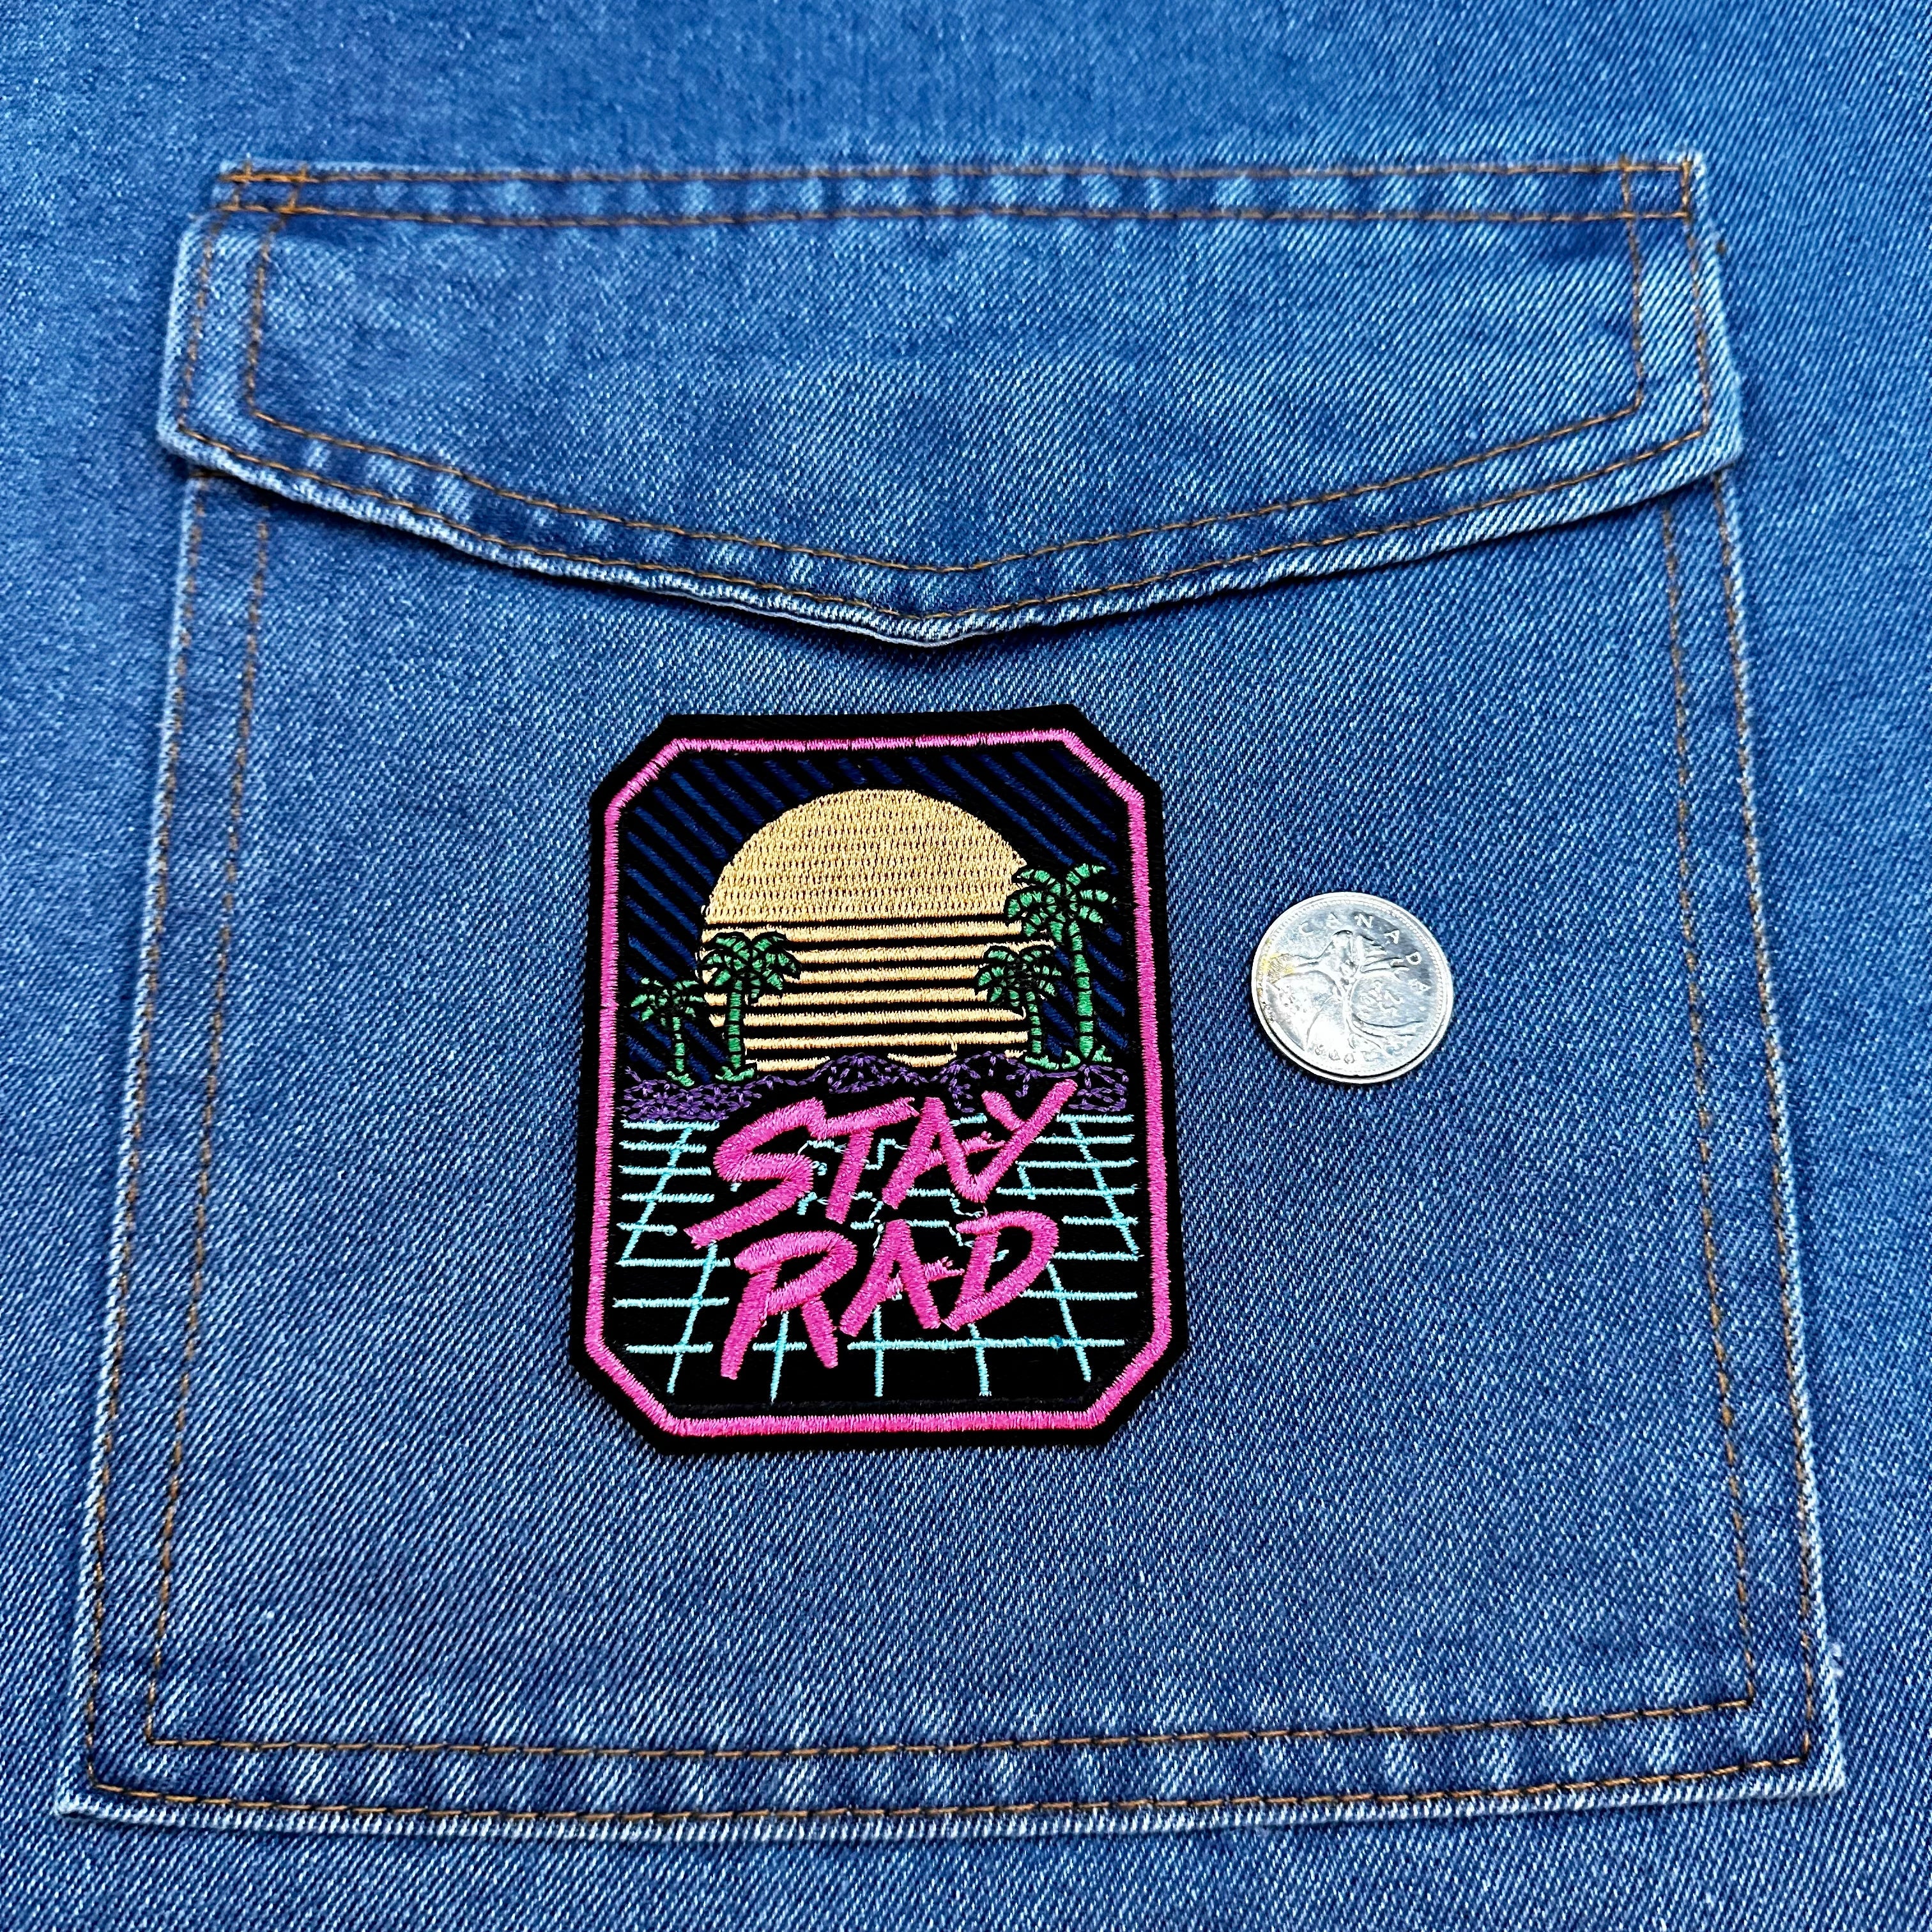 Iron On Patches - Stay Rad